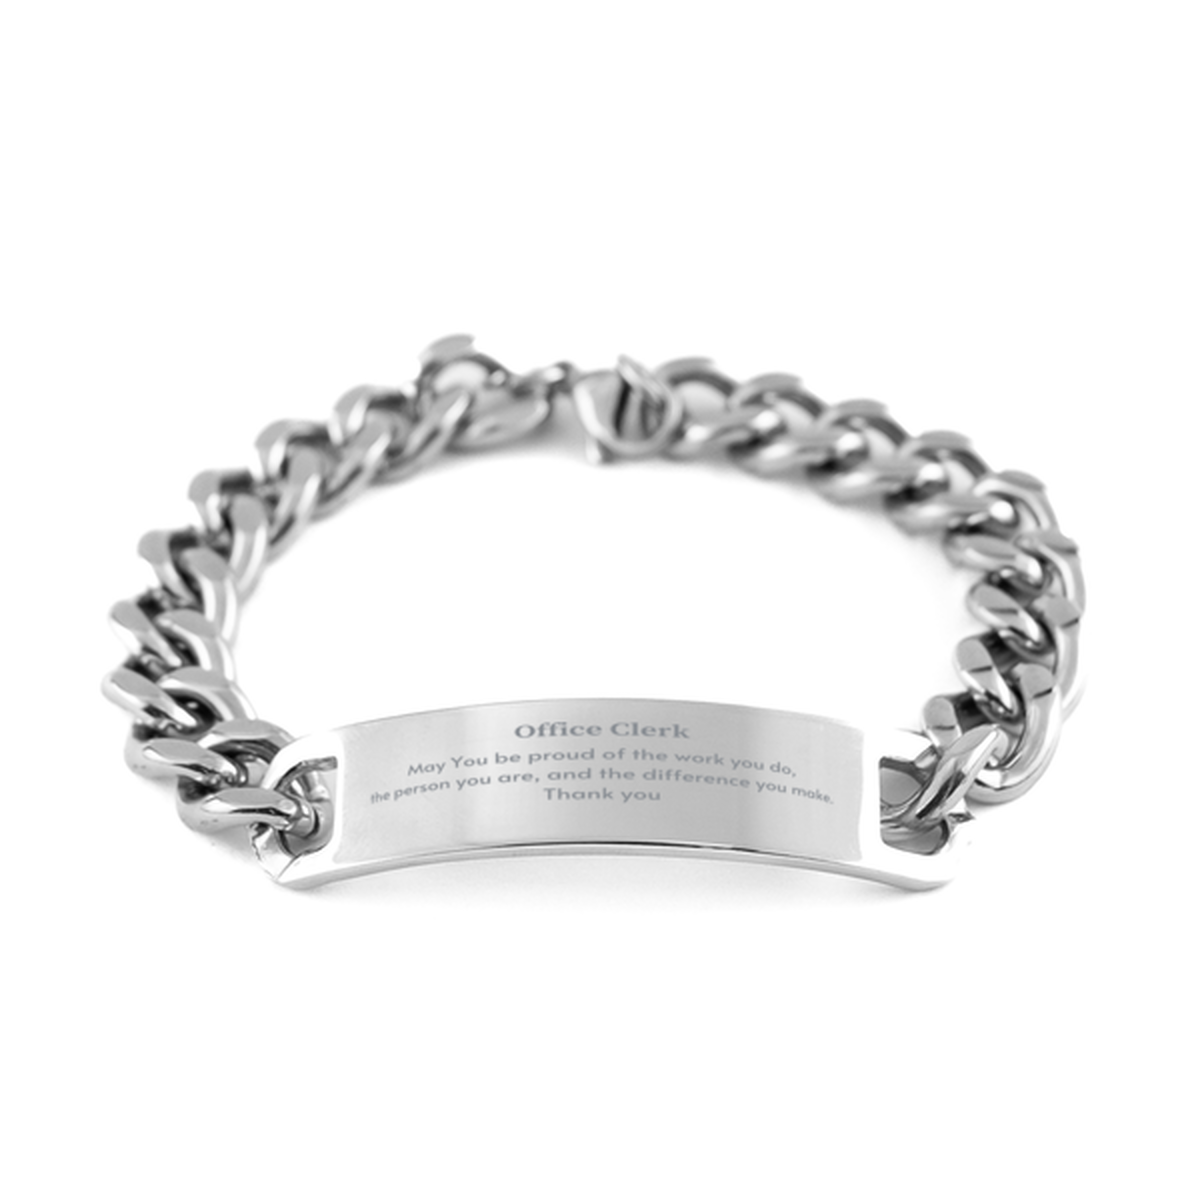 Heartwarming Cuban Chain Stainless Steel Bracelet Retirement Coworkers Gifts for Office Clerk, Office Clerk May You be proud of the work you do, the person you are Gifts for Boss Men Women Friends